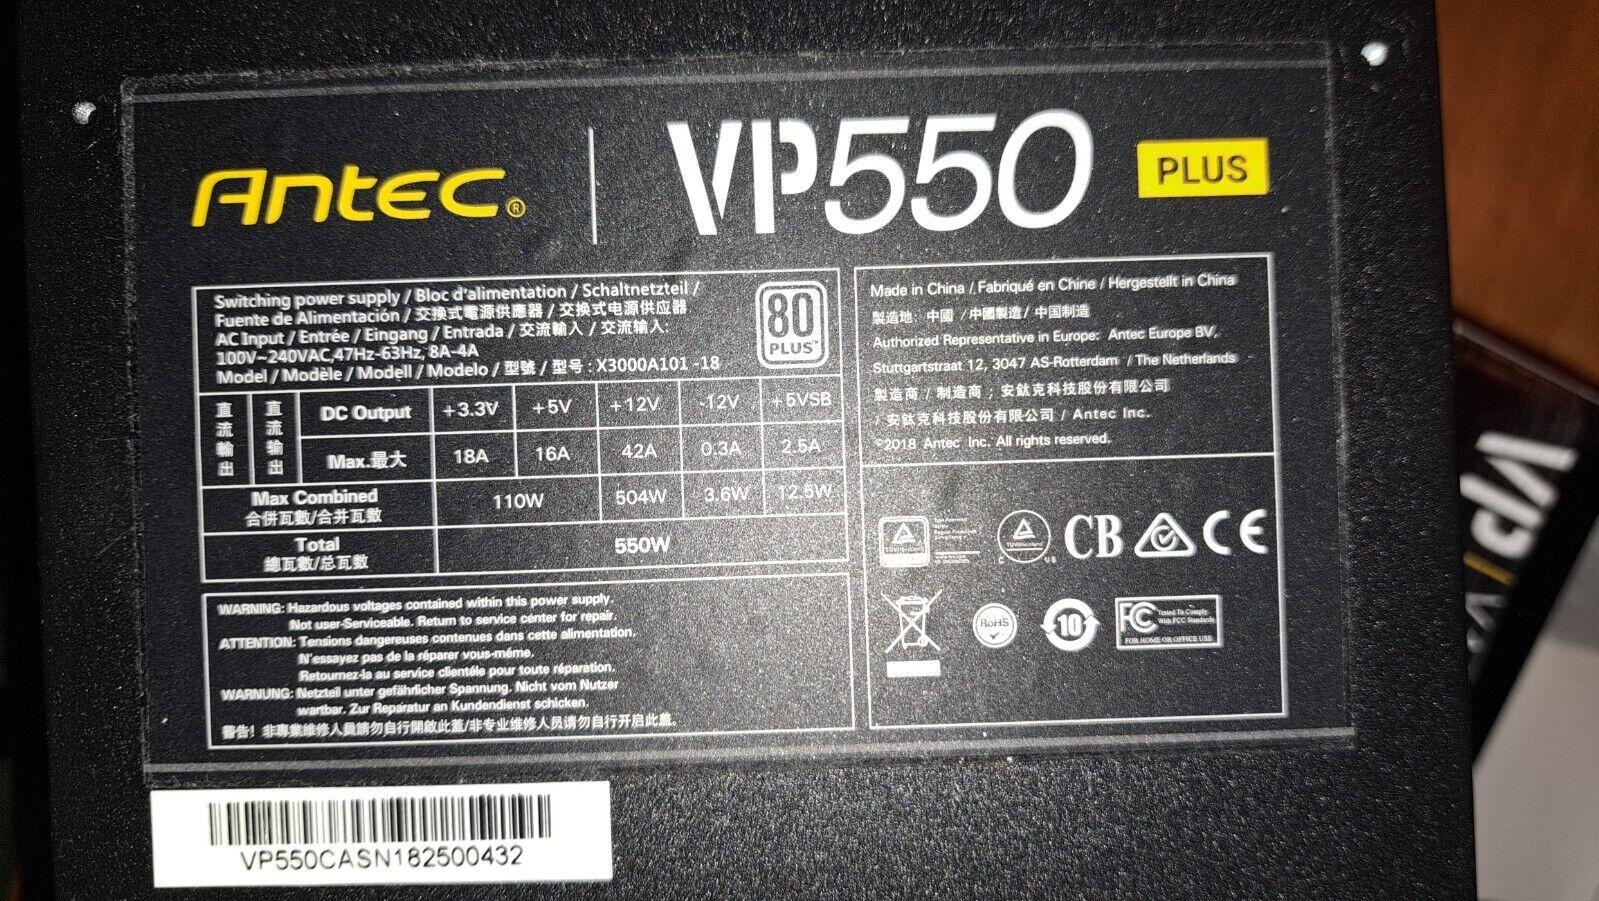 Antec 550W Power Supply VP550F 80 Plus 80+ used but very clean and in good shape